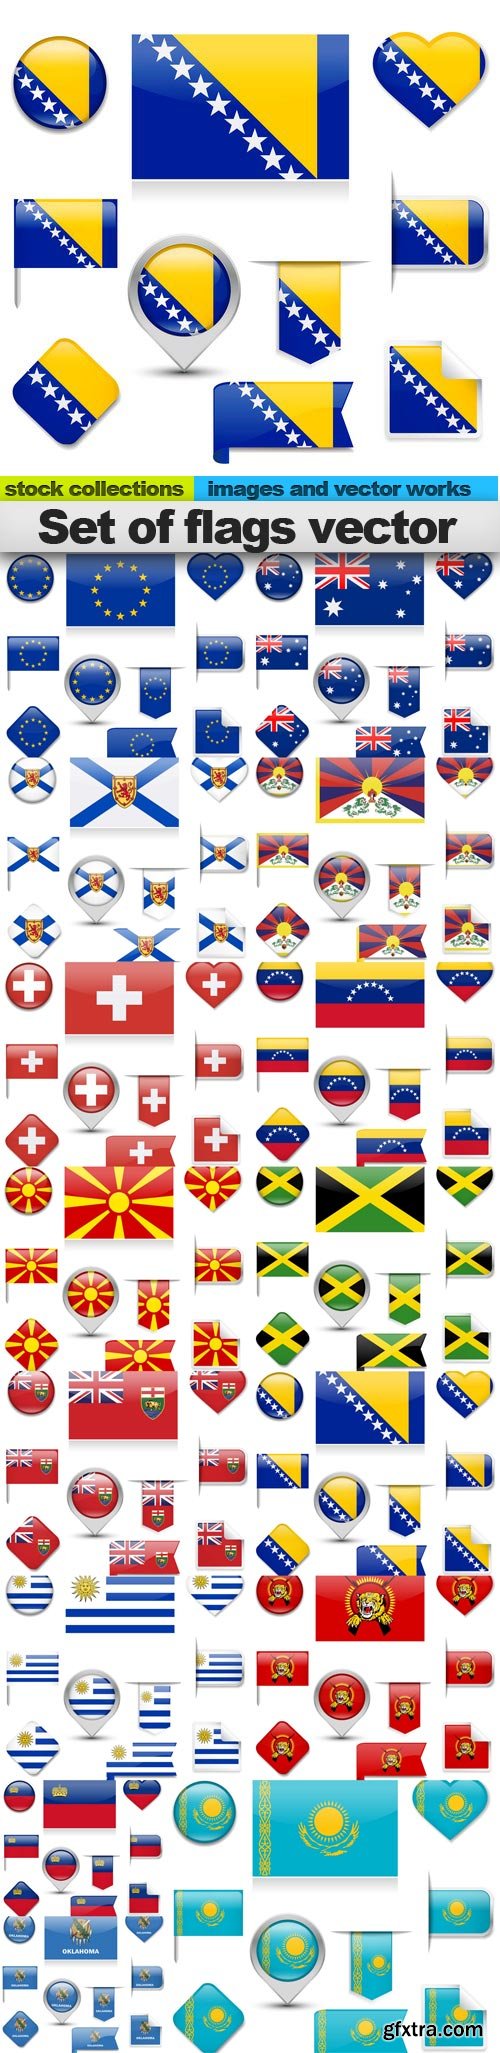 Set of flags vector, 15 x EPS